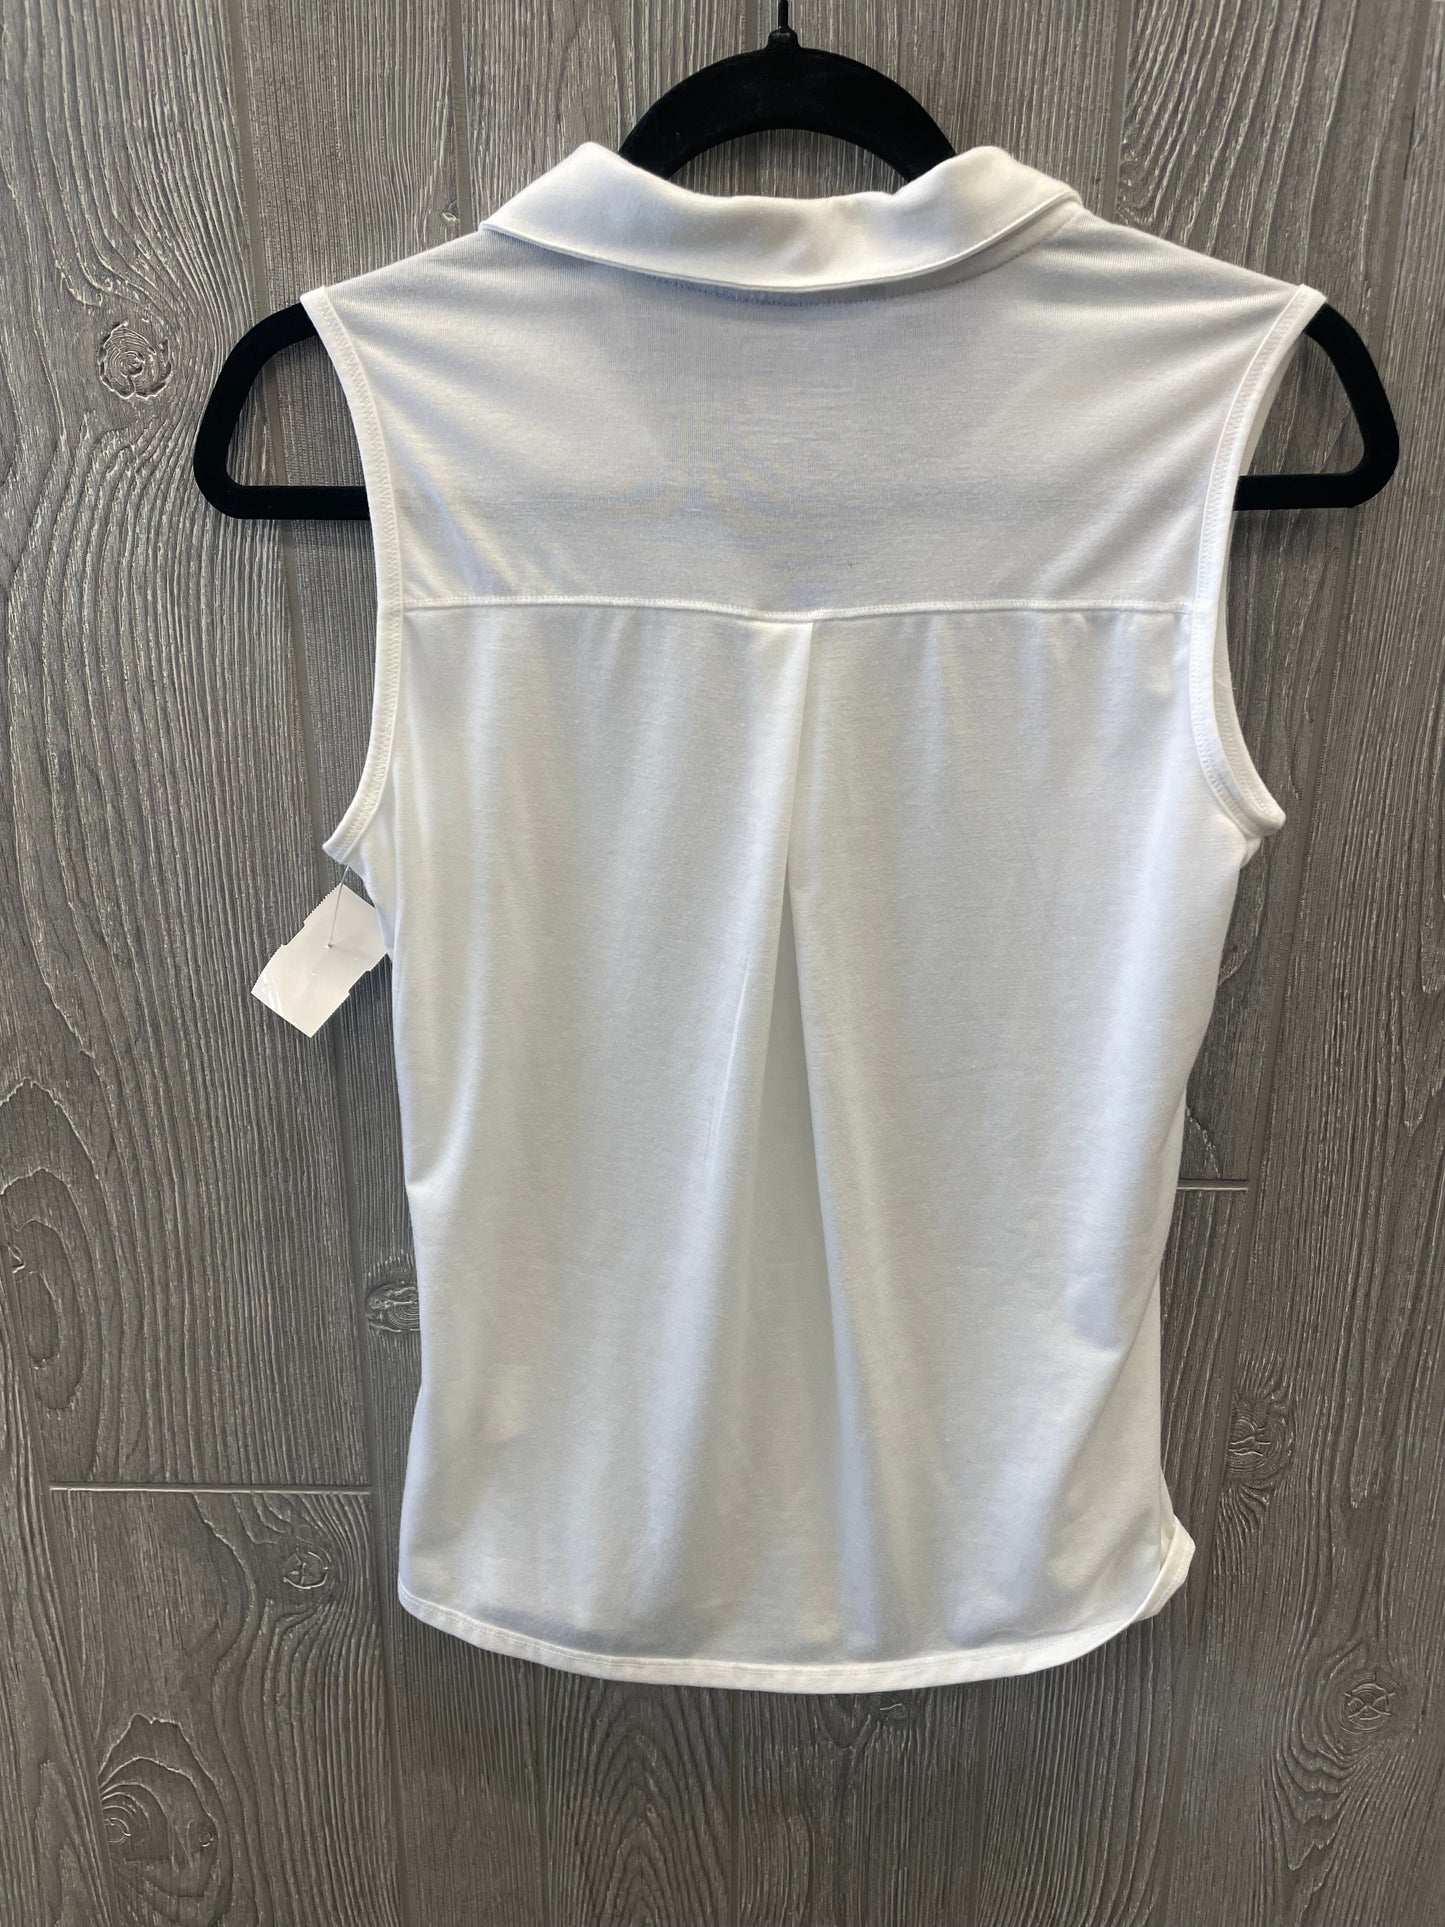 White Athletic Tank Top Adidas, Size S